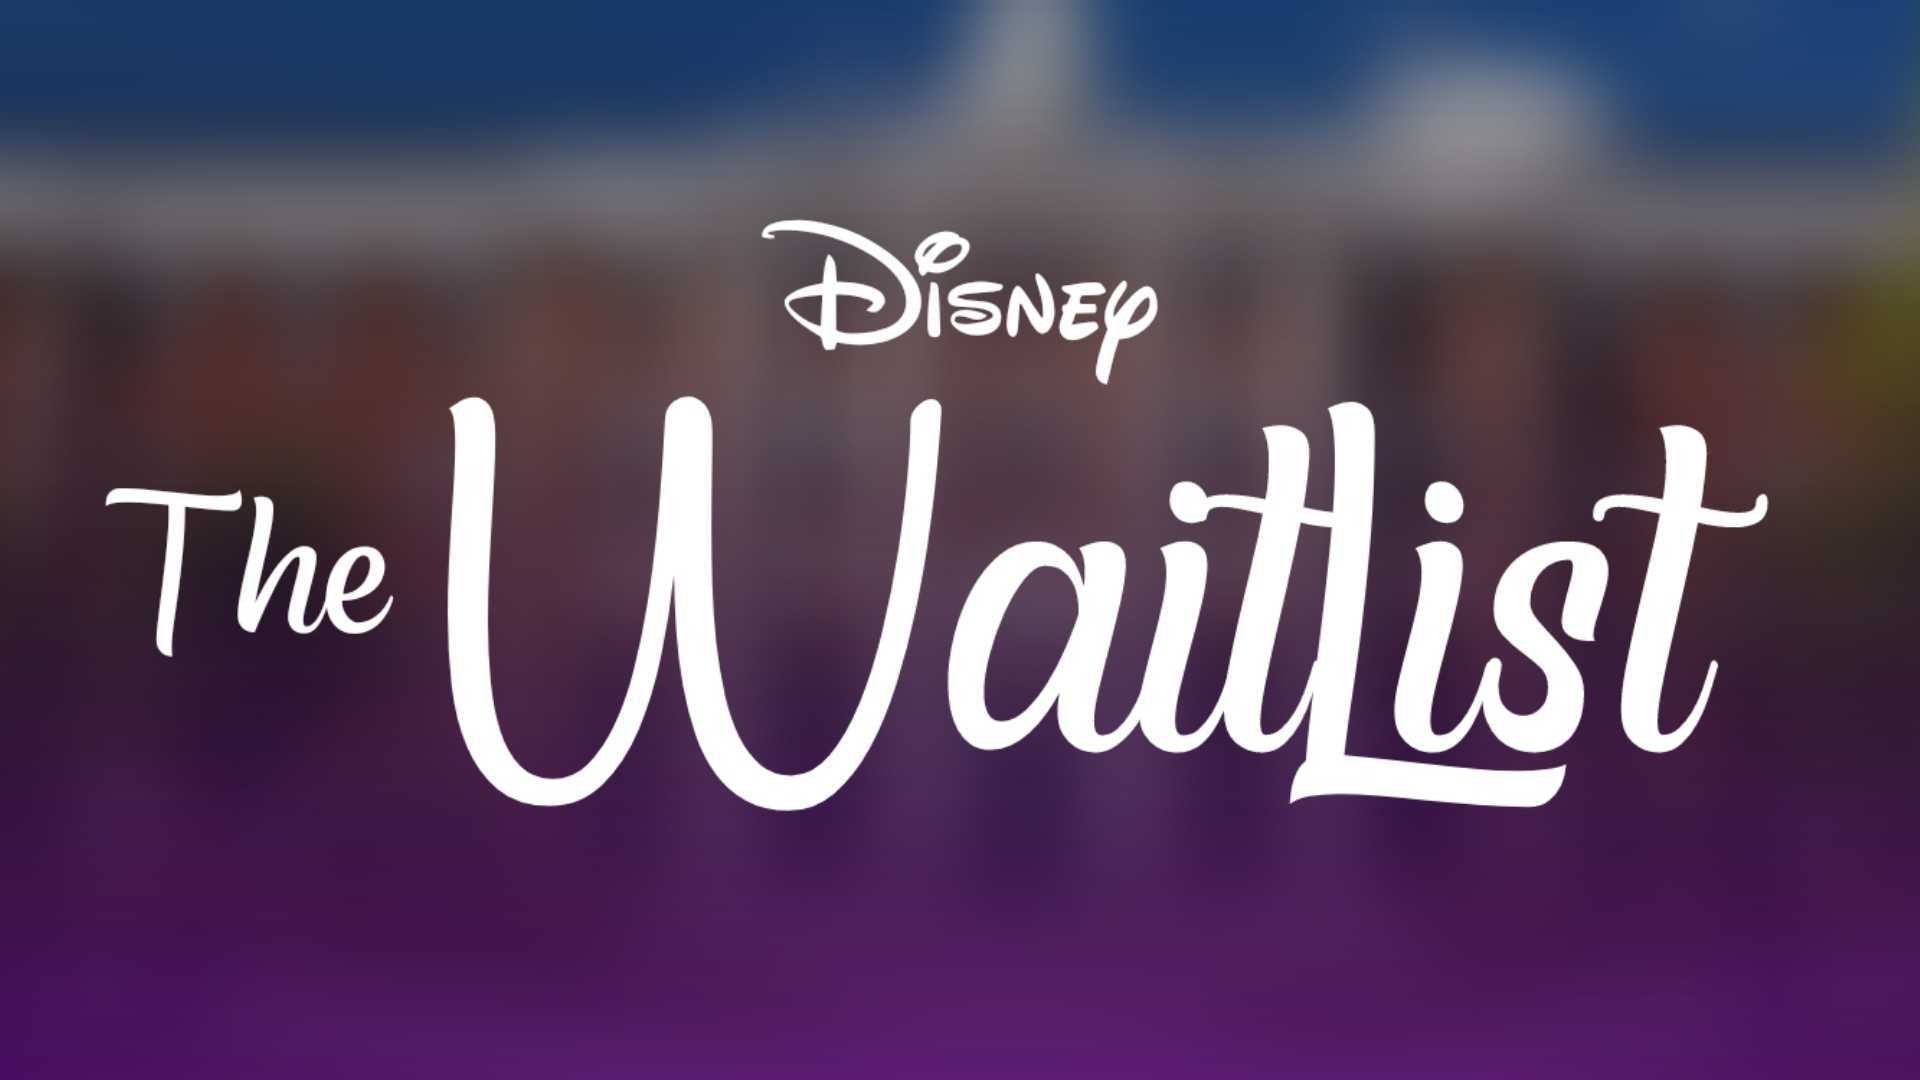 EXCLUSIVE: A New Original Film Titled ‘The Waitlist’ In The Works At Disney+